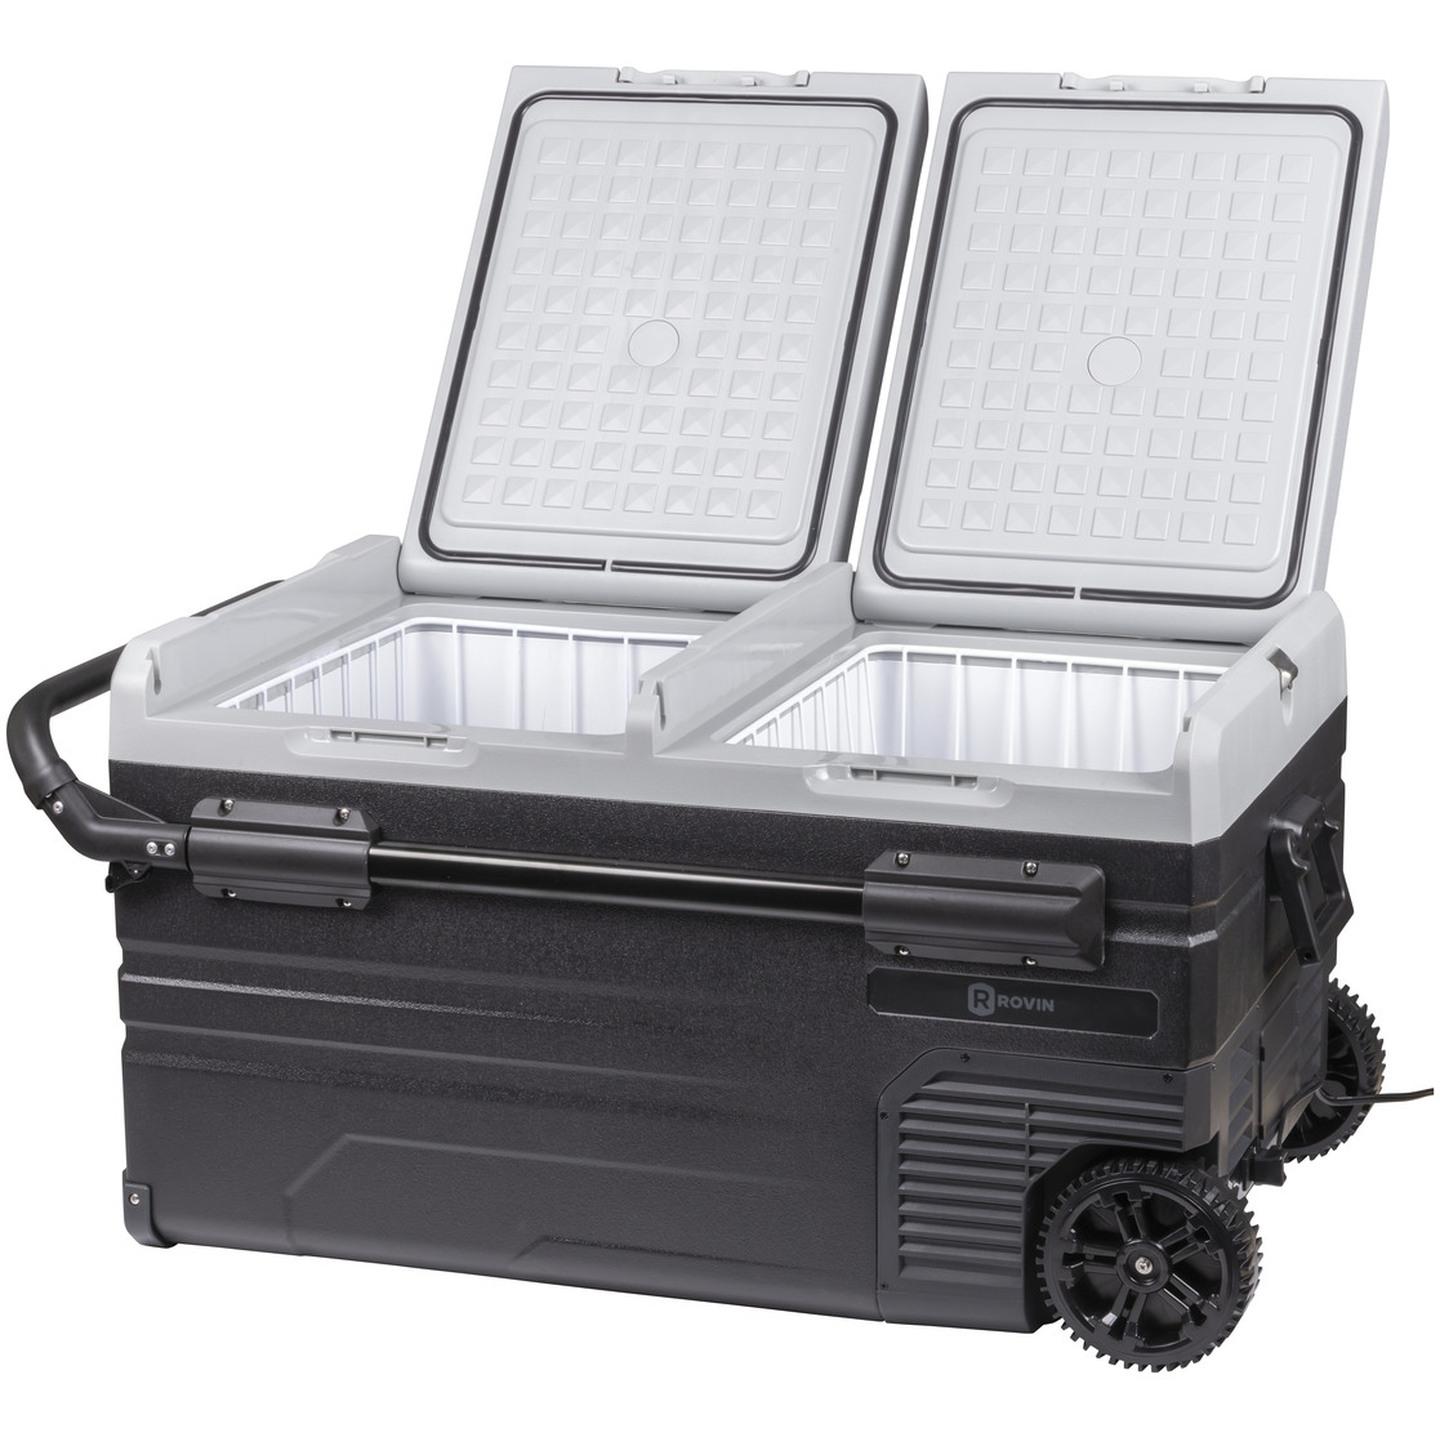 75L Rovin Dual Zone Portable Fridge or Freezer with Solar Charger Board plus HandleWheels and Battery Compartment